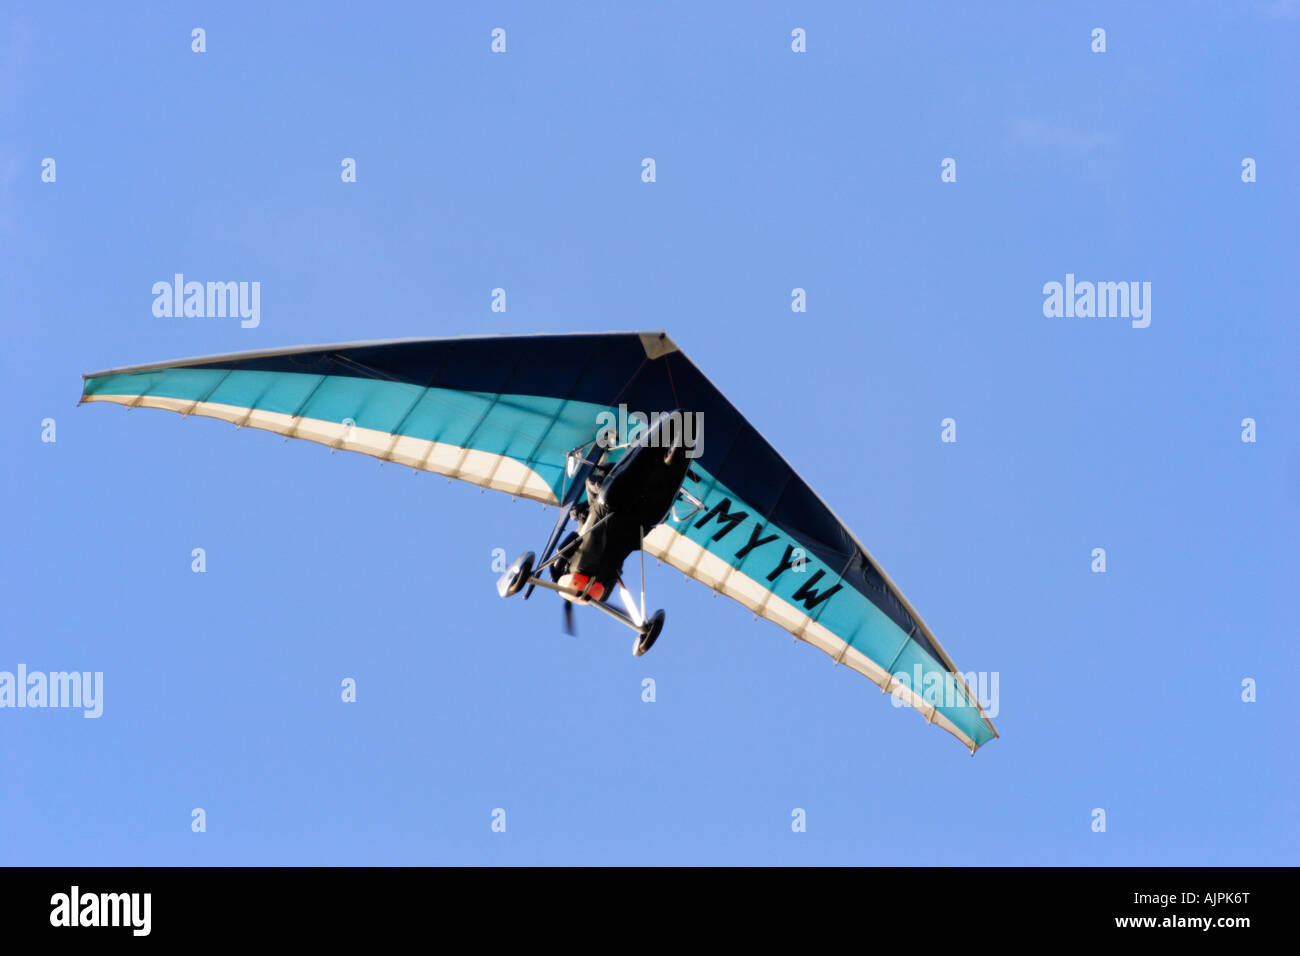 Horizontal photo of a Microlite flying against a blue sky Stock Photo